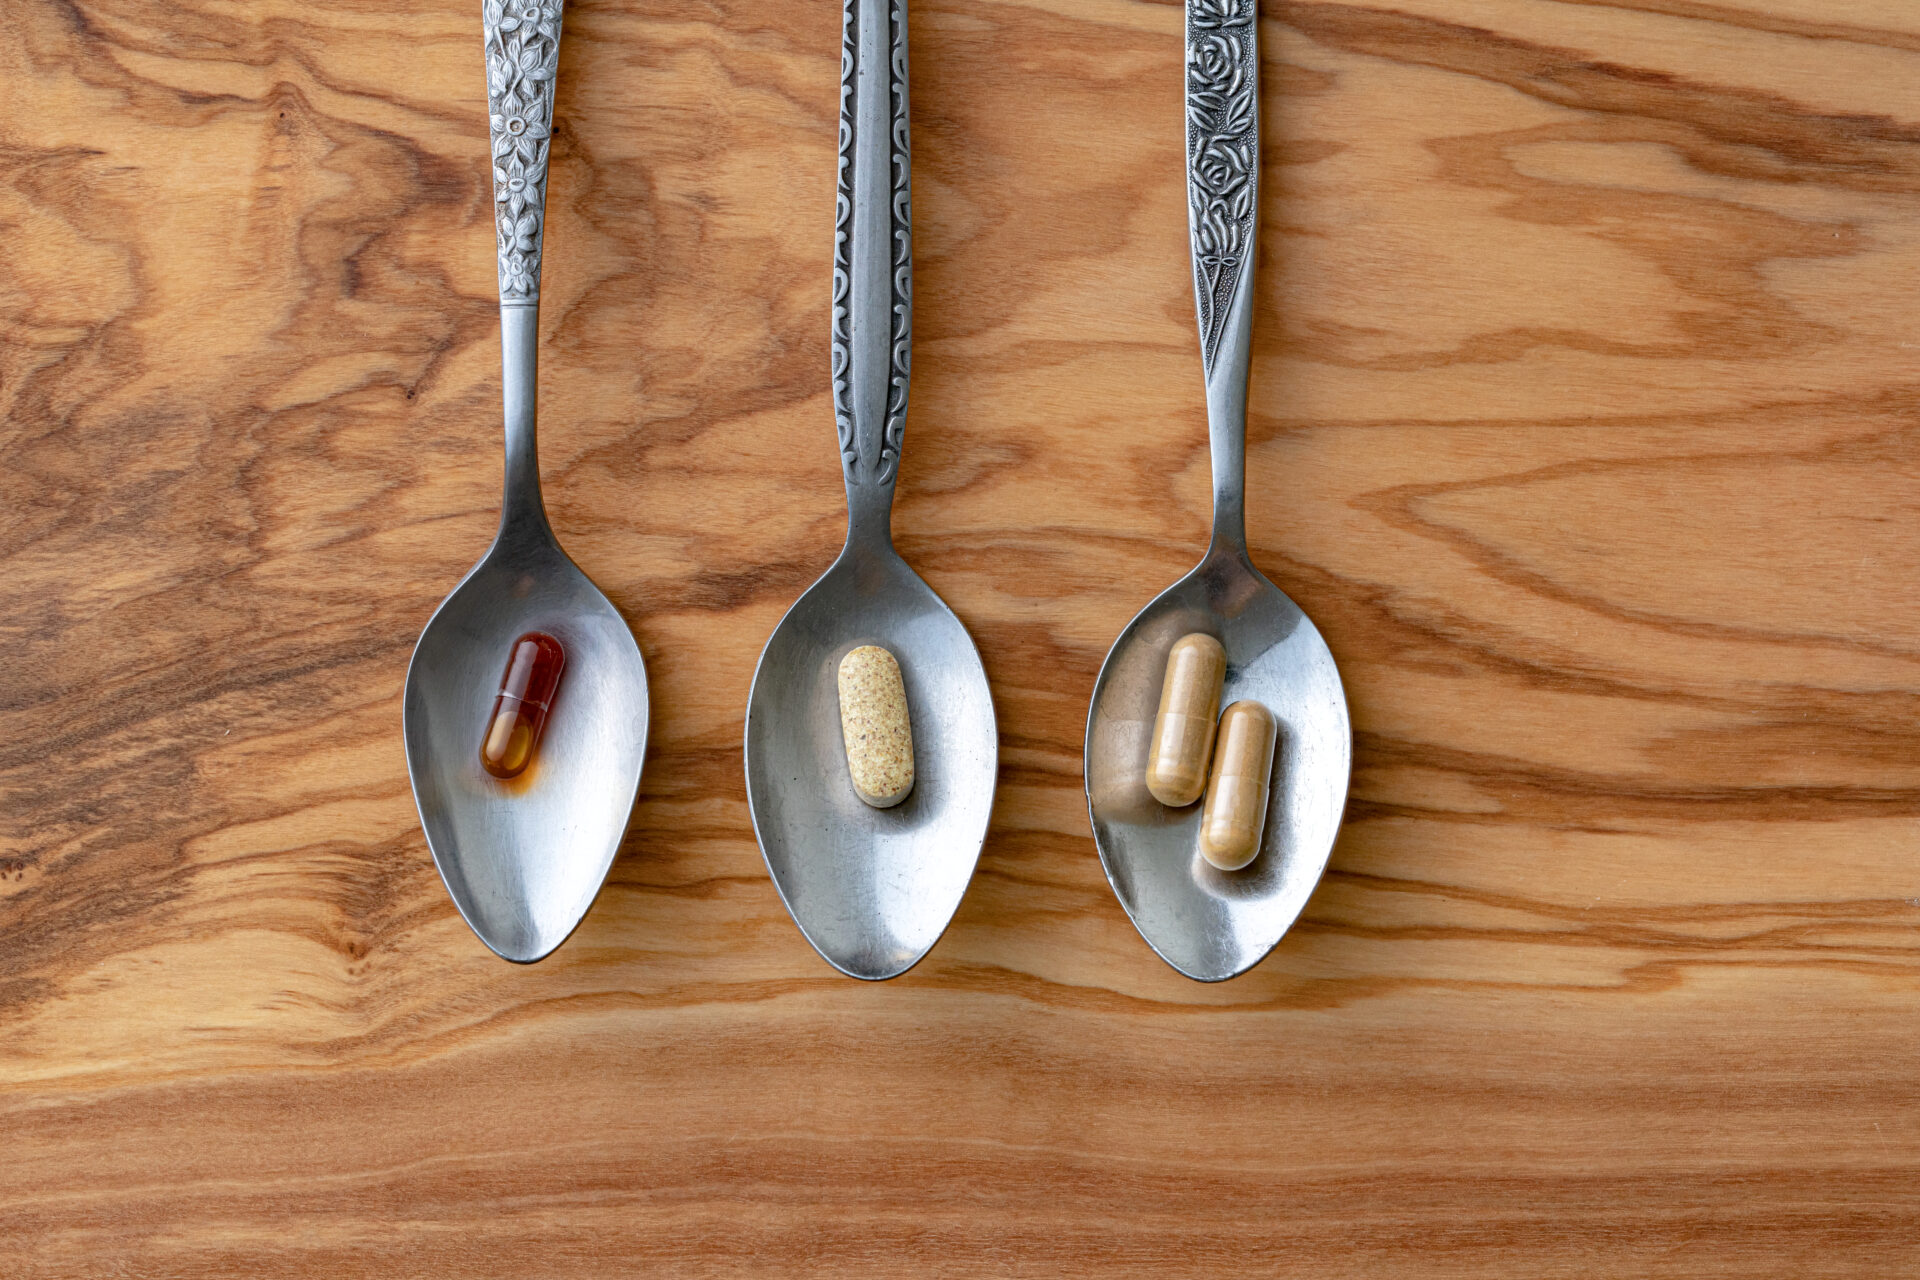 Master Formula lined up on spoons over a wooden surface - Young Living Lavender Life Blog 